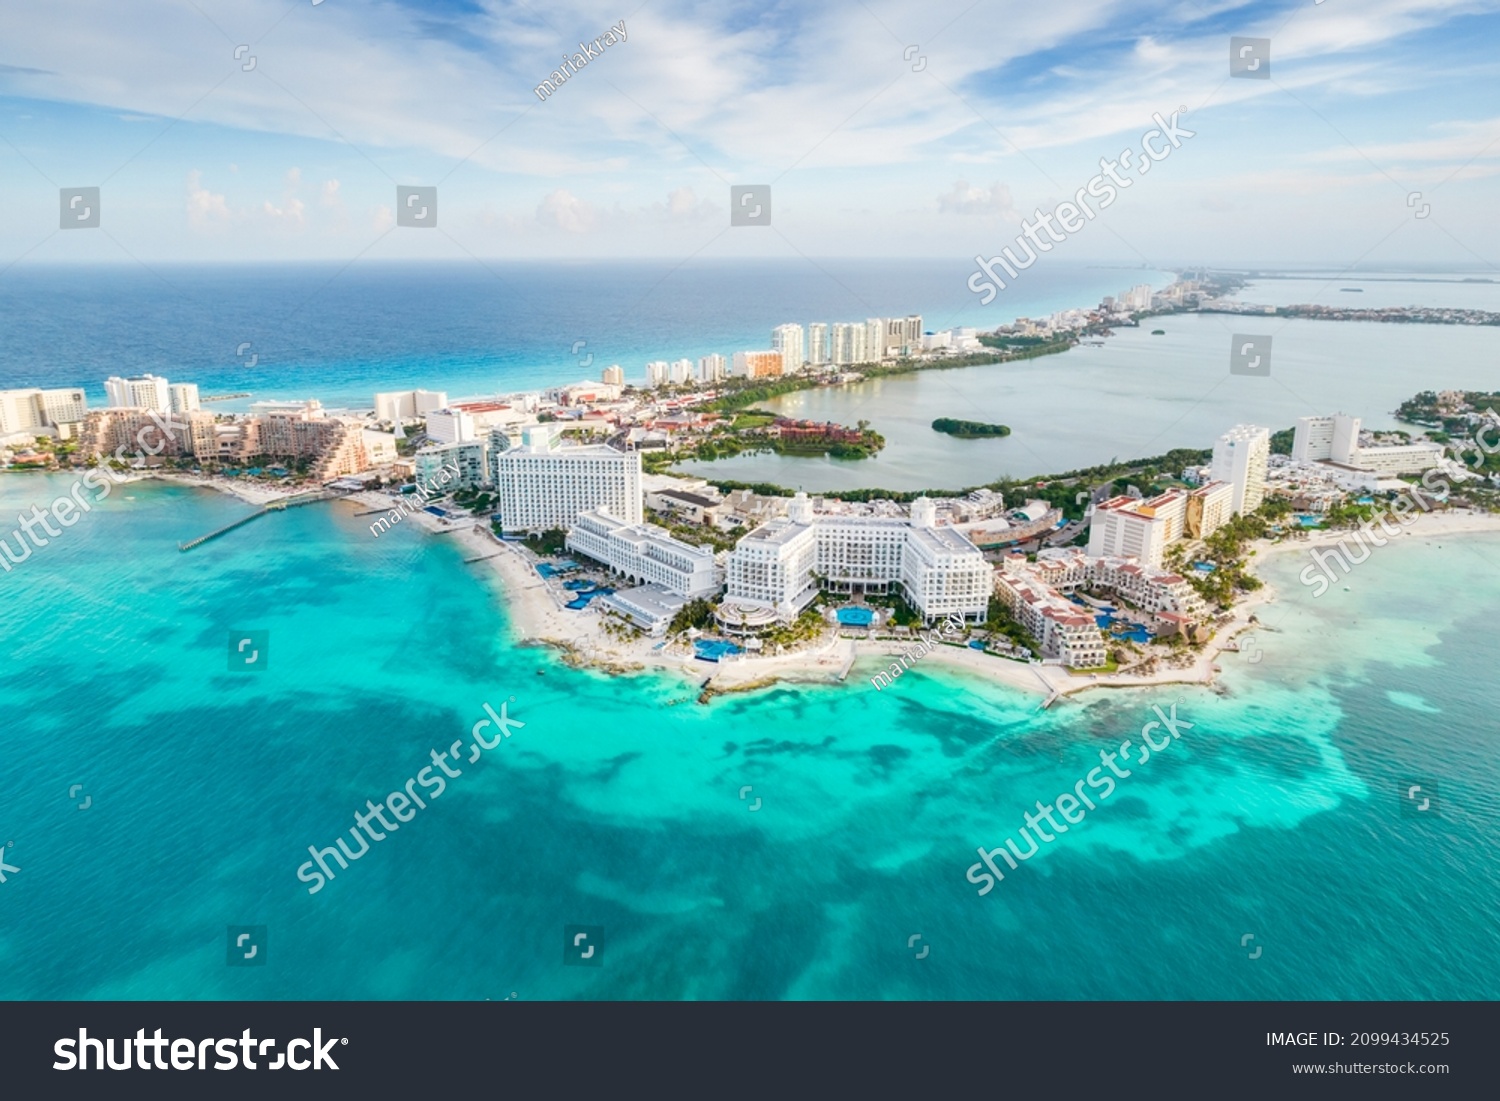 Aerial panoramic view of Cancun beach and city hotel zone in Mexico. Caribbean coast landscape of Mexican resort with beach Playa Caracol and Kukulcan road. Riviera Maya in Quintana roo region on #2099434525